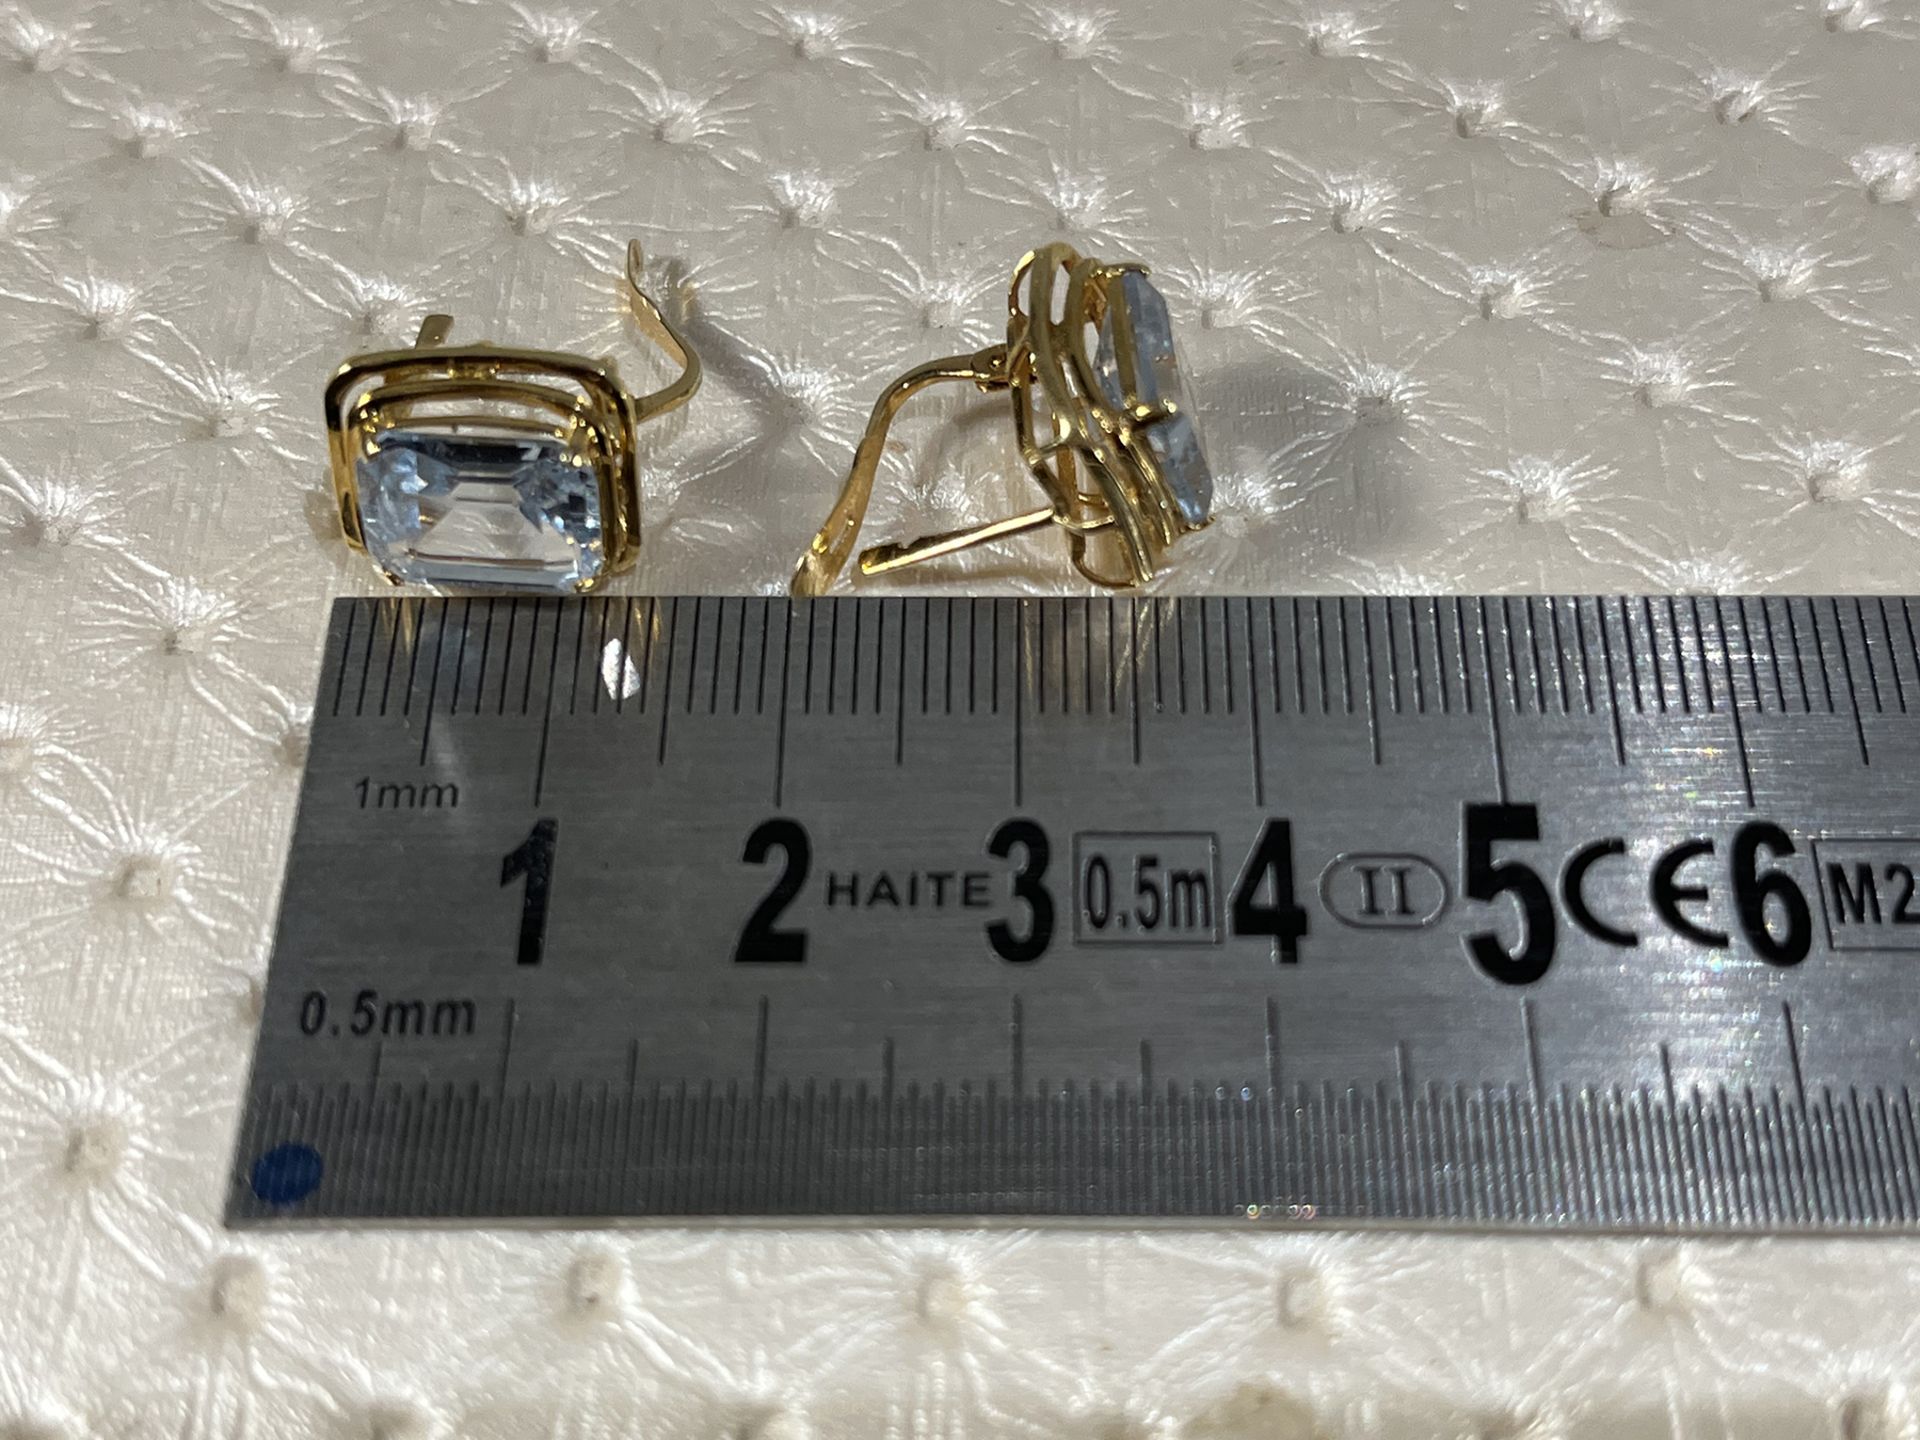 18k gold and topaz earrings - Image 4 of 6